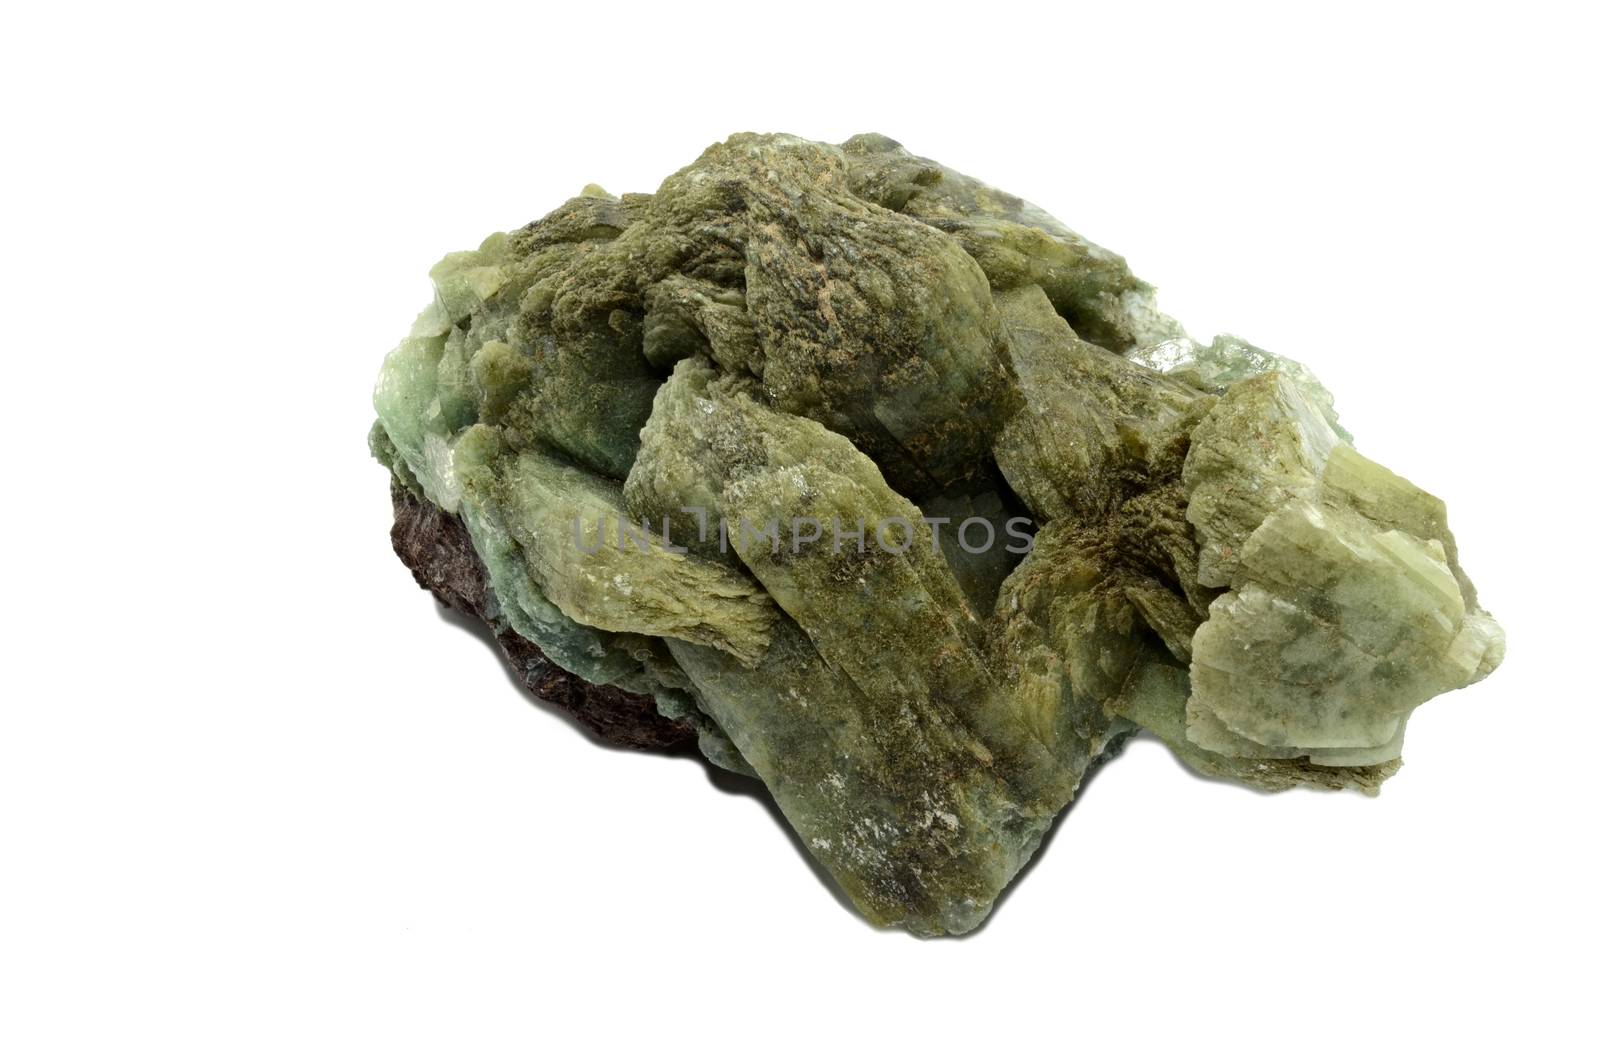 Sample of green Zeolite a beautiful nature specimen isolated on white background